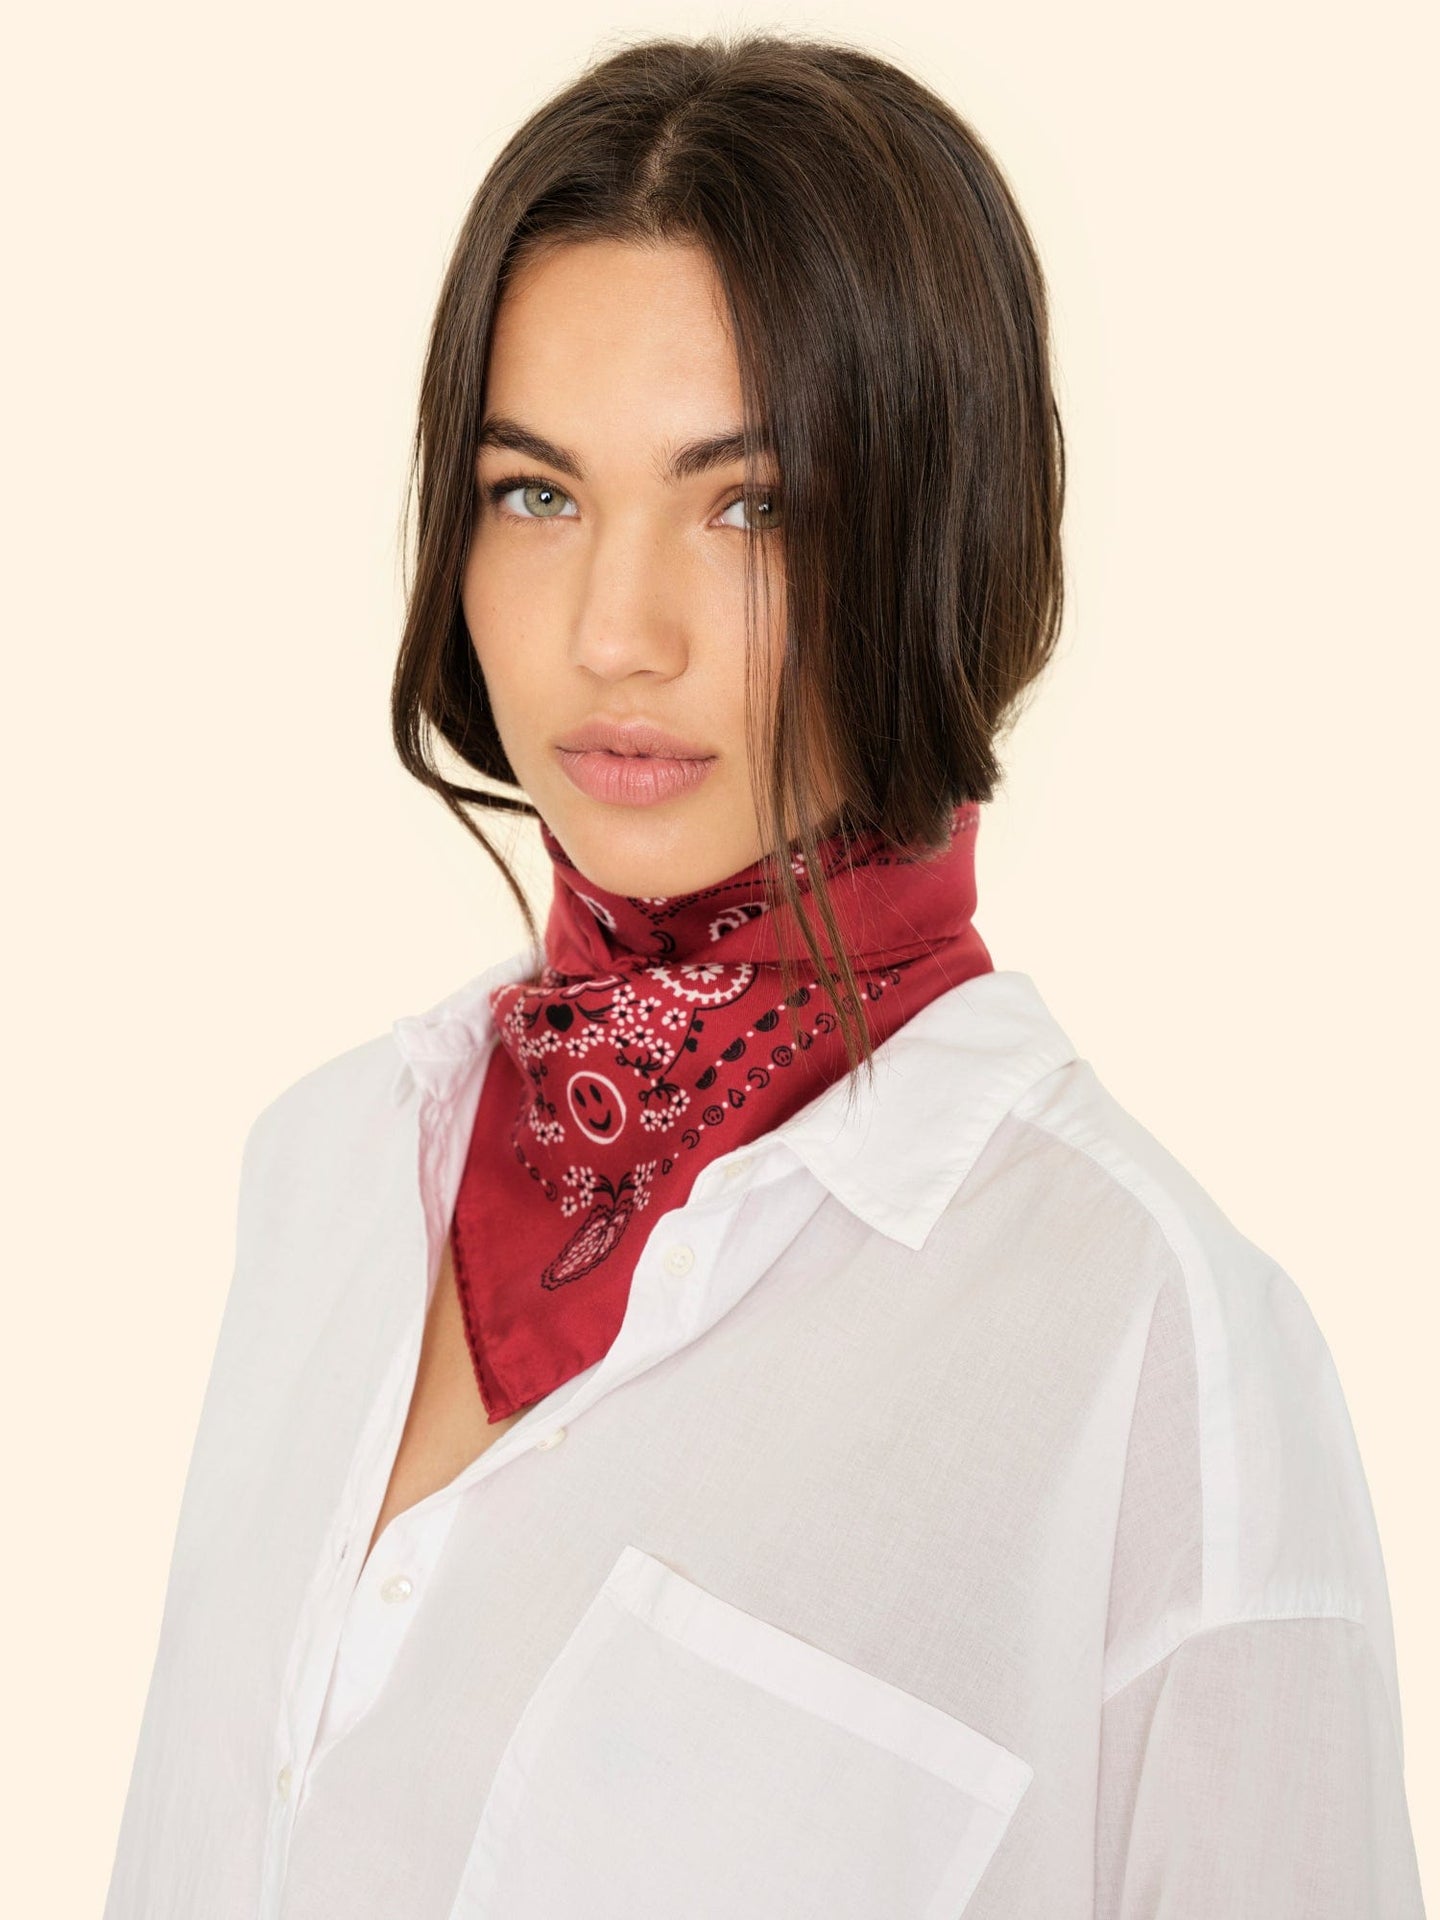 CALL IT BY YOUR NAME Accessory One Size / Red CALL IT BY YOUR NAME Red Silk Bandana C0SLK200-OS-RED